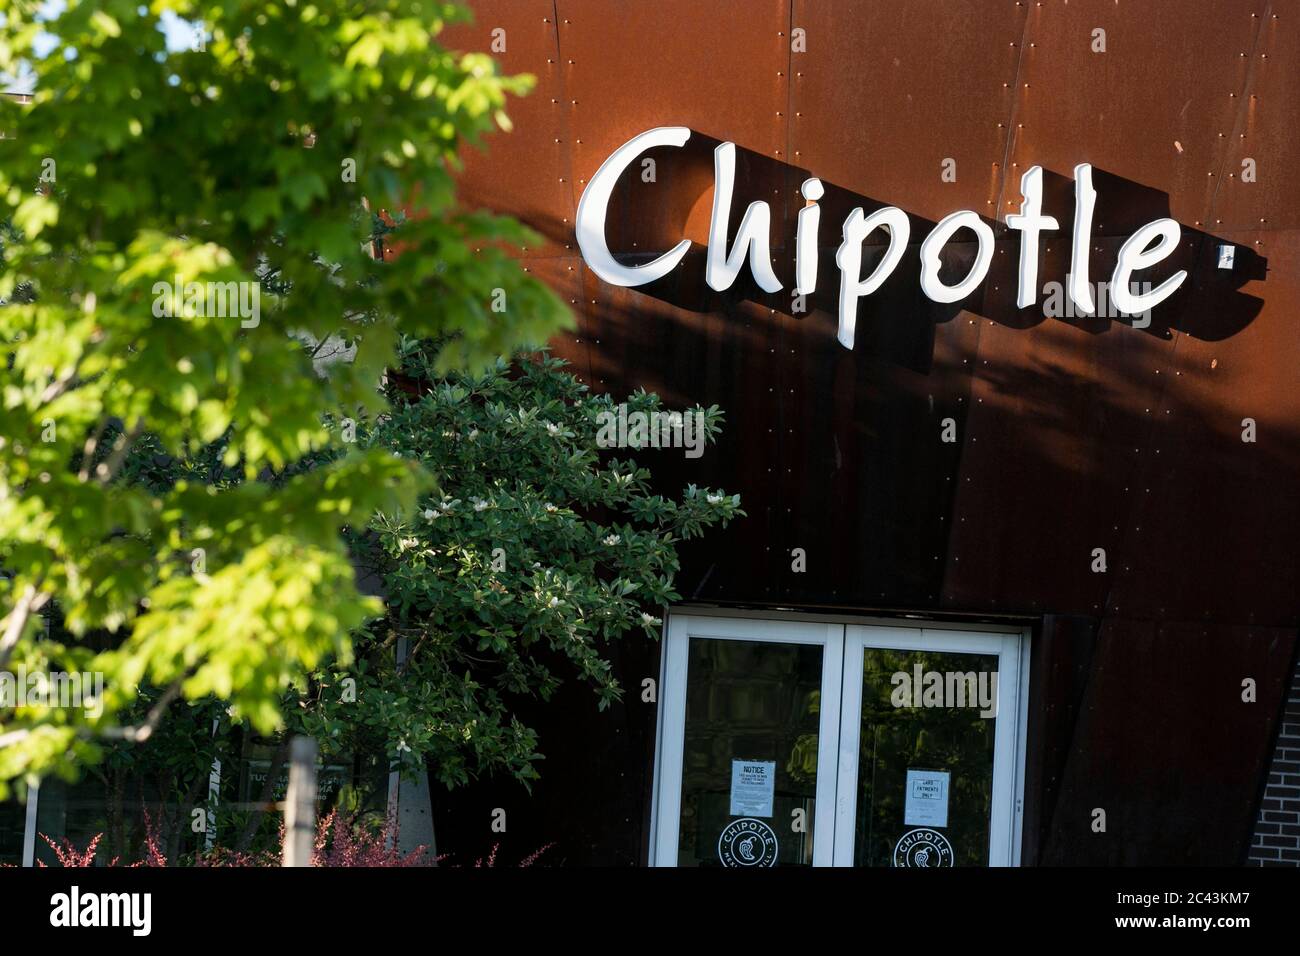 A logo sign outside of a Chipotle restaurant location in Bowie, Maryland on June 8, 2020. Stock Photo